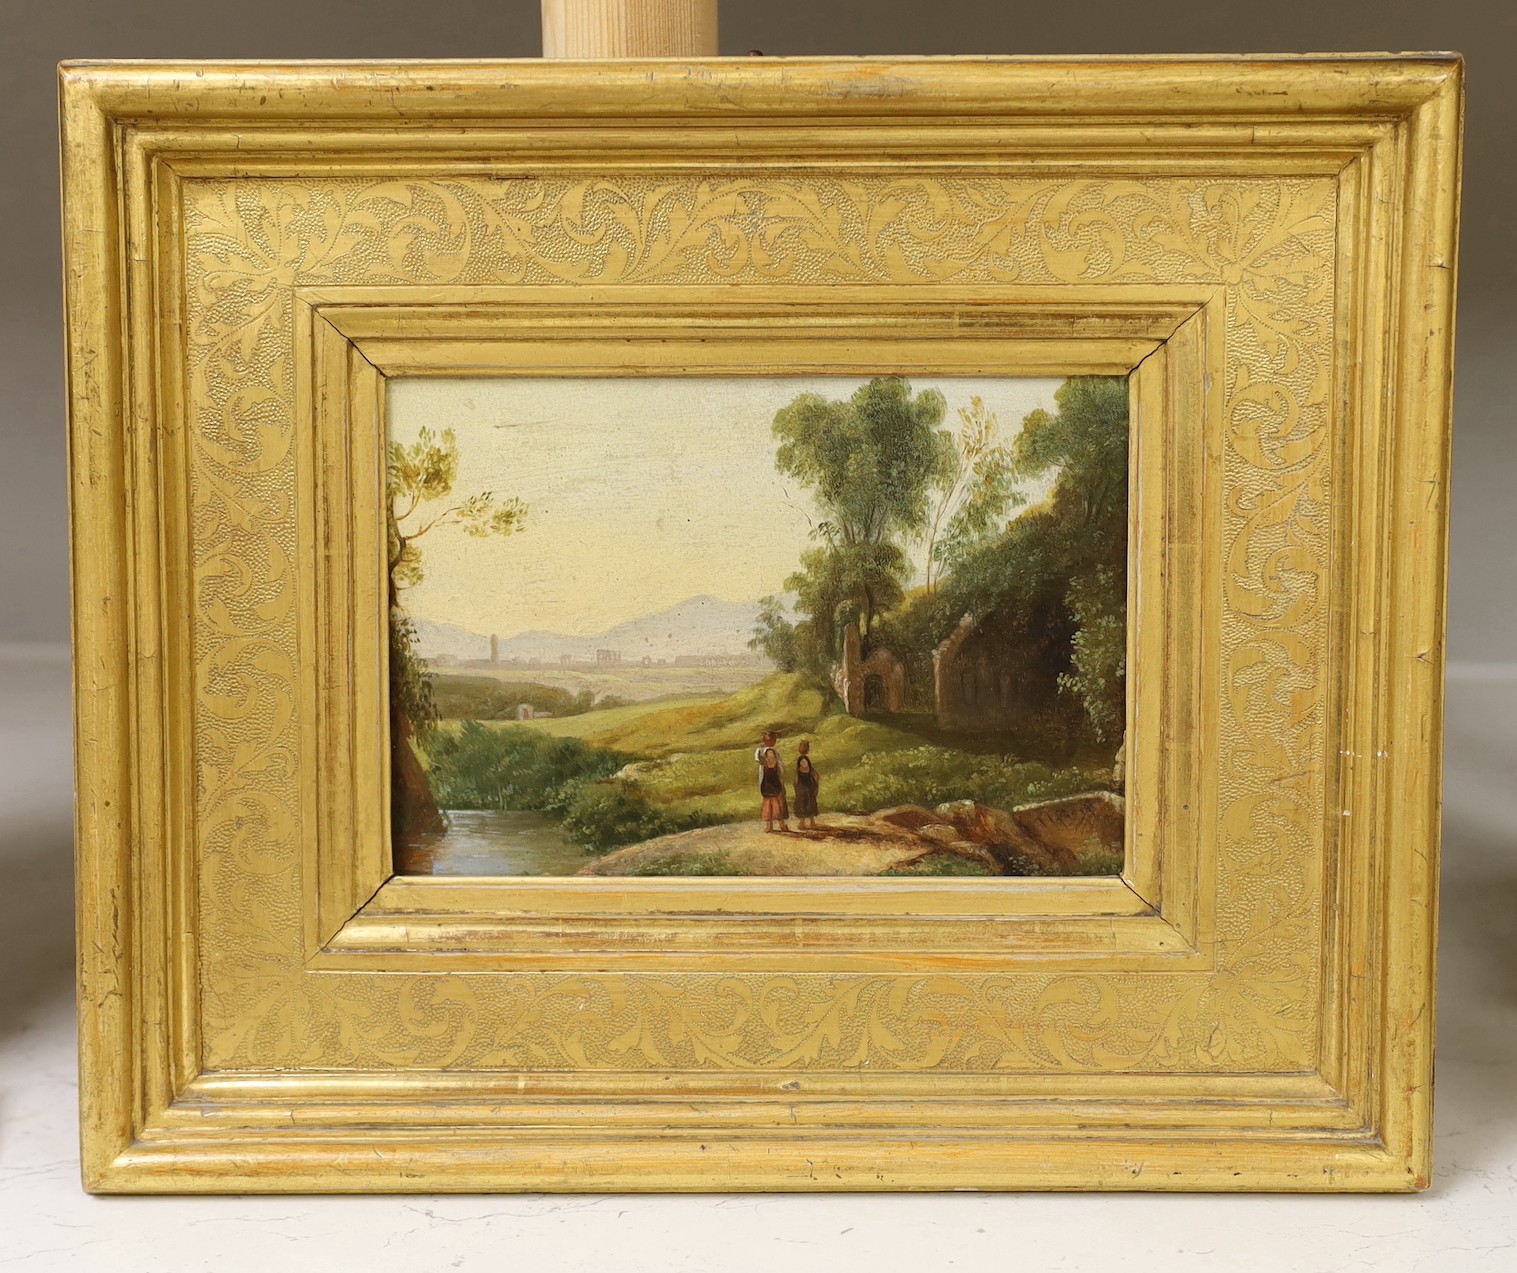 19th century English School, oil on card, Italianate landscape with watercarriers in the foreground, ruins beyond, 11.5 x 16.5cm